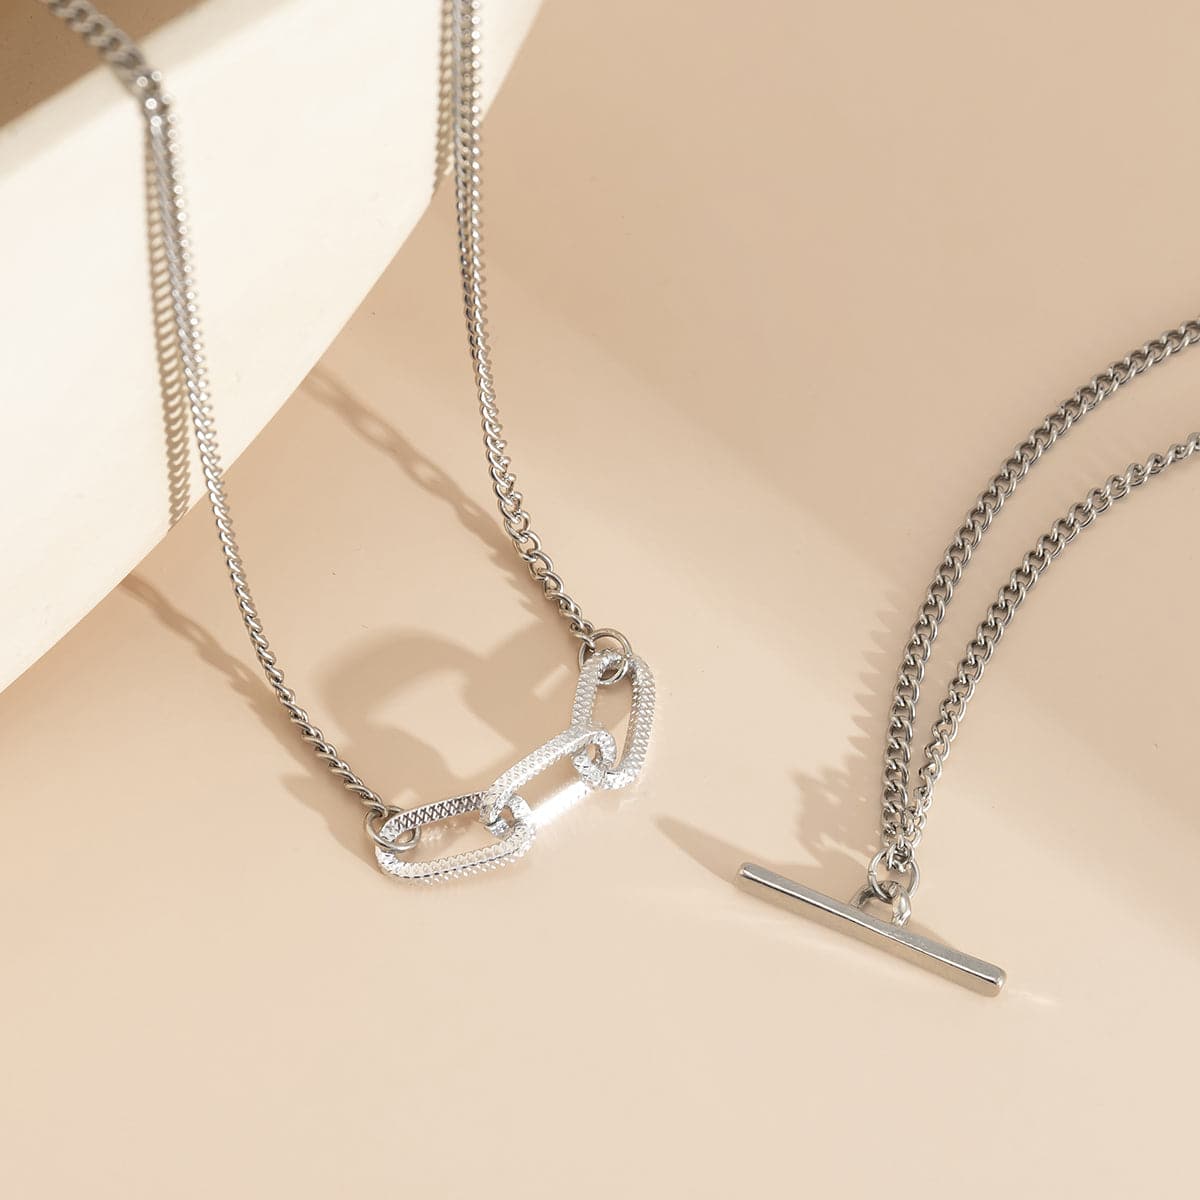 Silver-Plated Bar Layered Pendant Necklace